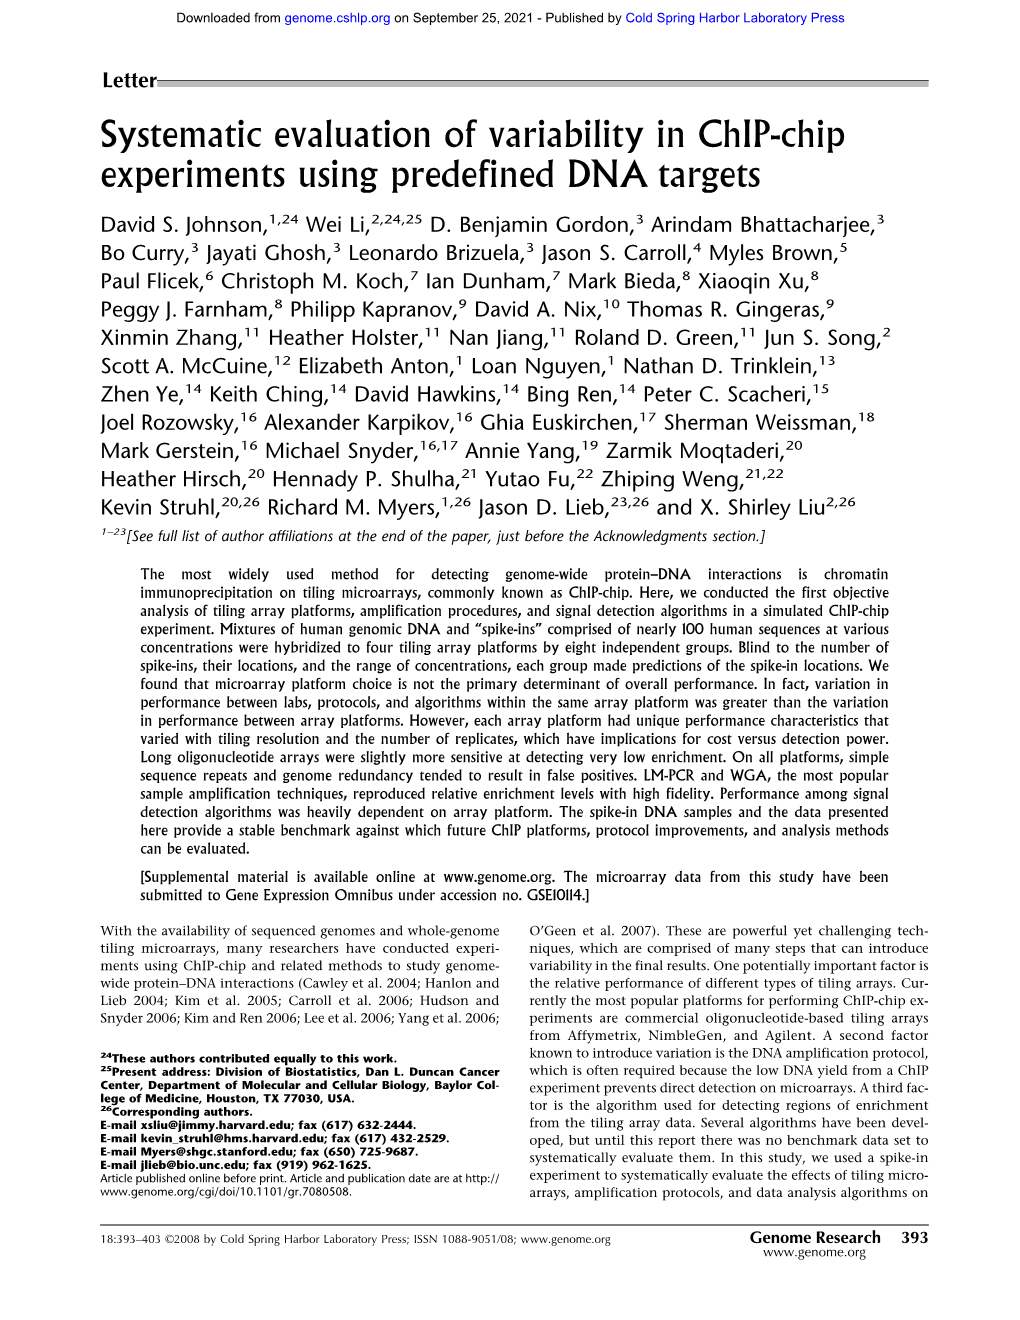 Systematic Evaluation of Variability in Chip-Chip Experiments Using Predefined DNA Targets